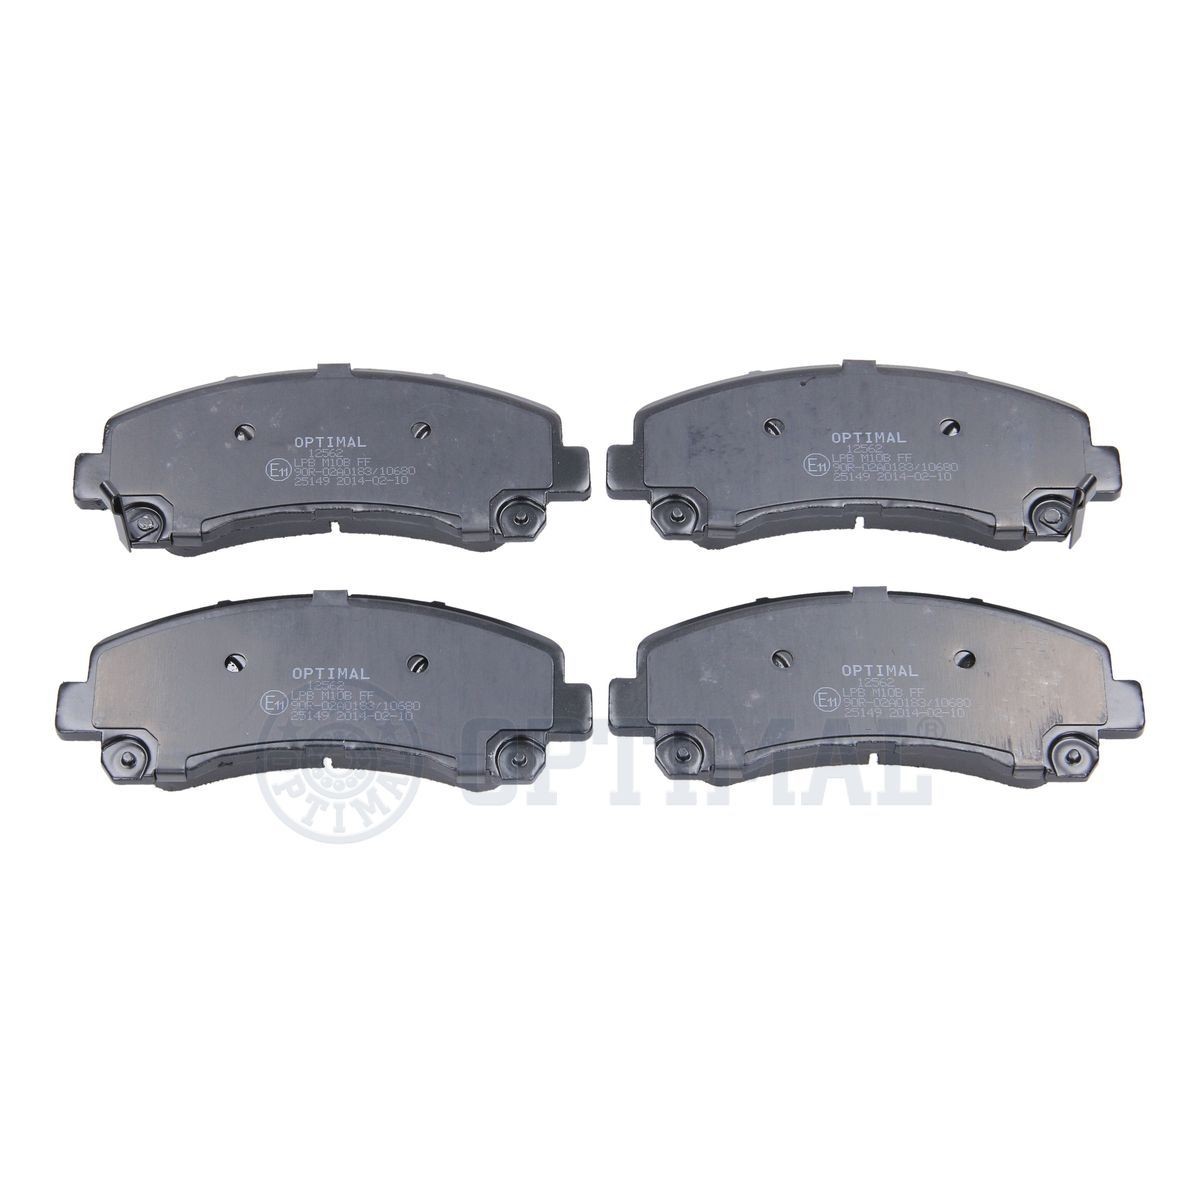 OPTIMAL BP-12562 Brake pad set Front Axle, with acoustic wear warning